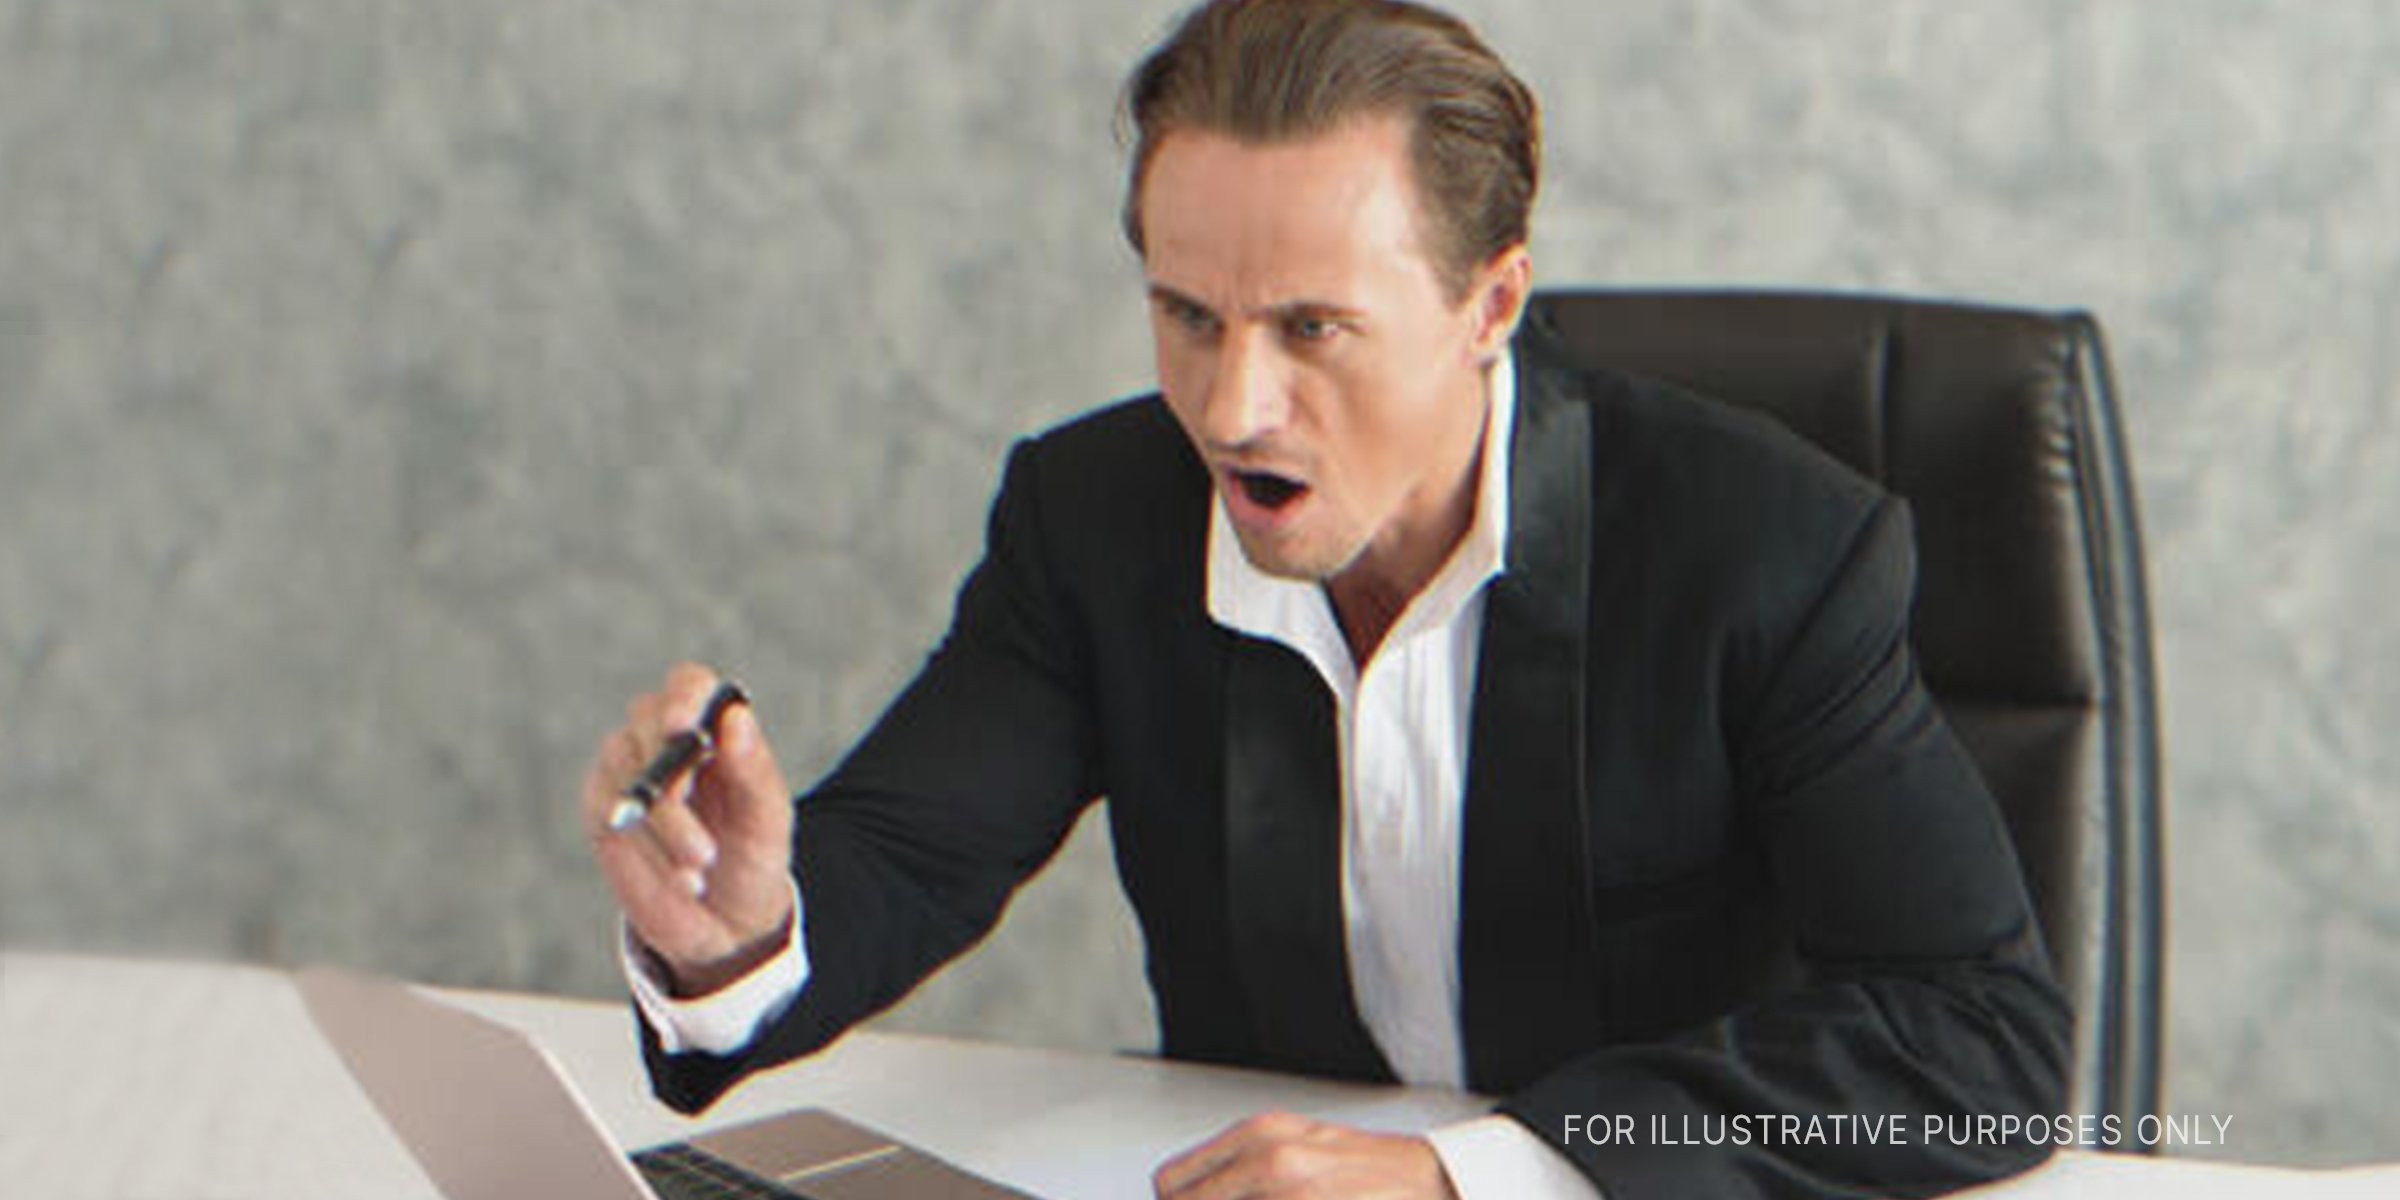 Man sitting on a desk, pointing angrily. | Source: Shutterstock